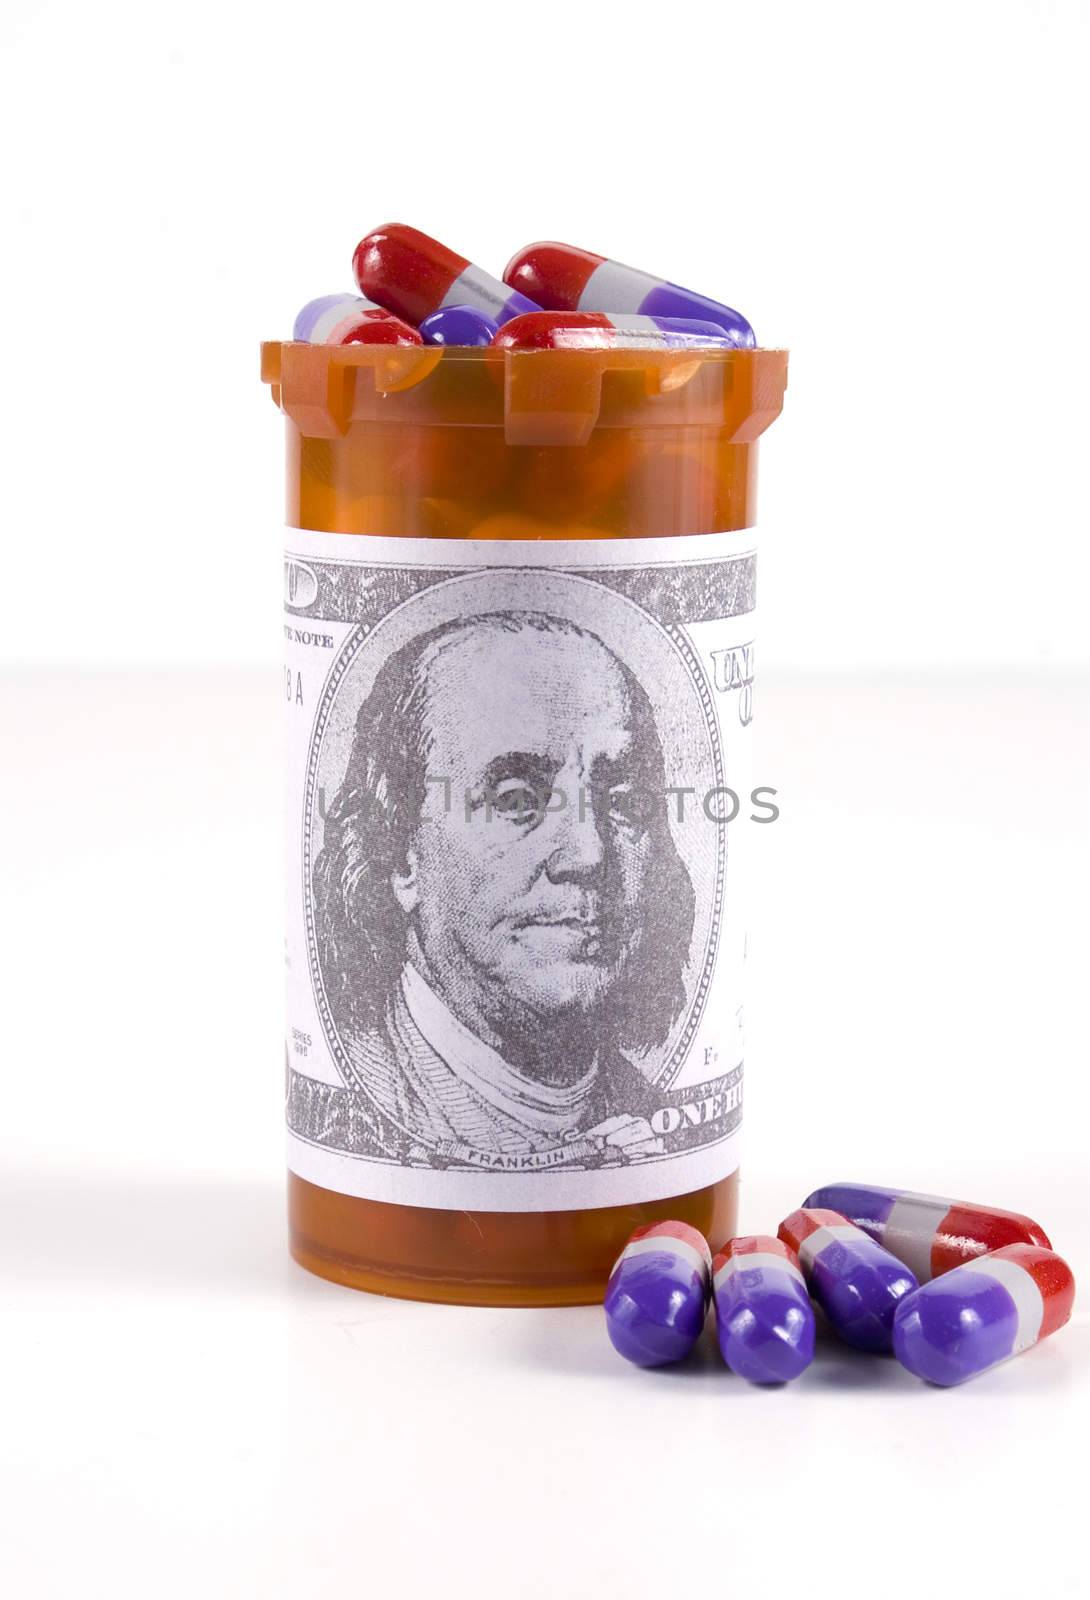 A single pill bottle, labeled with a hundred dollar bill, with purple and red pills.







A pill bottle with lots of pills.